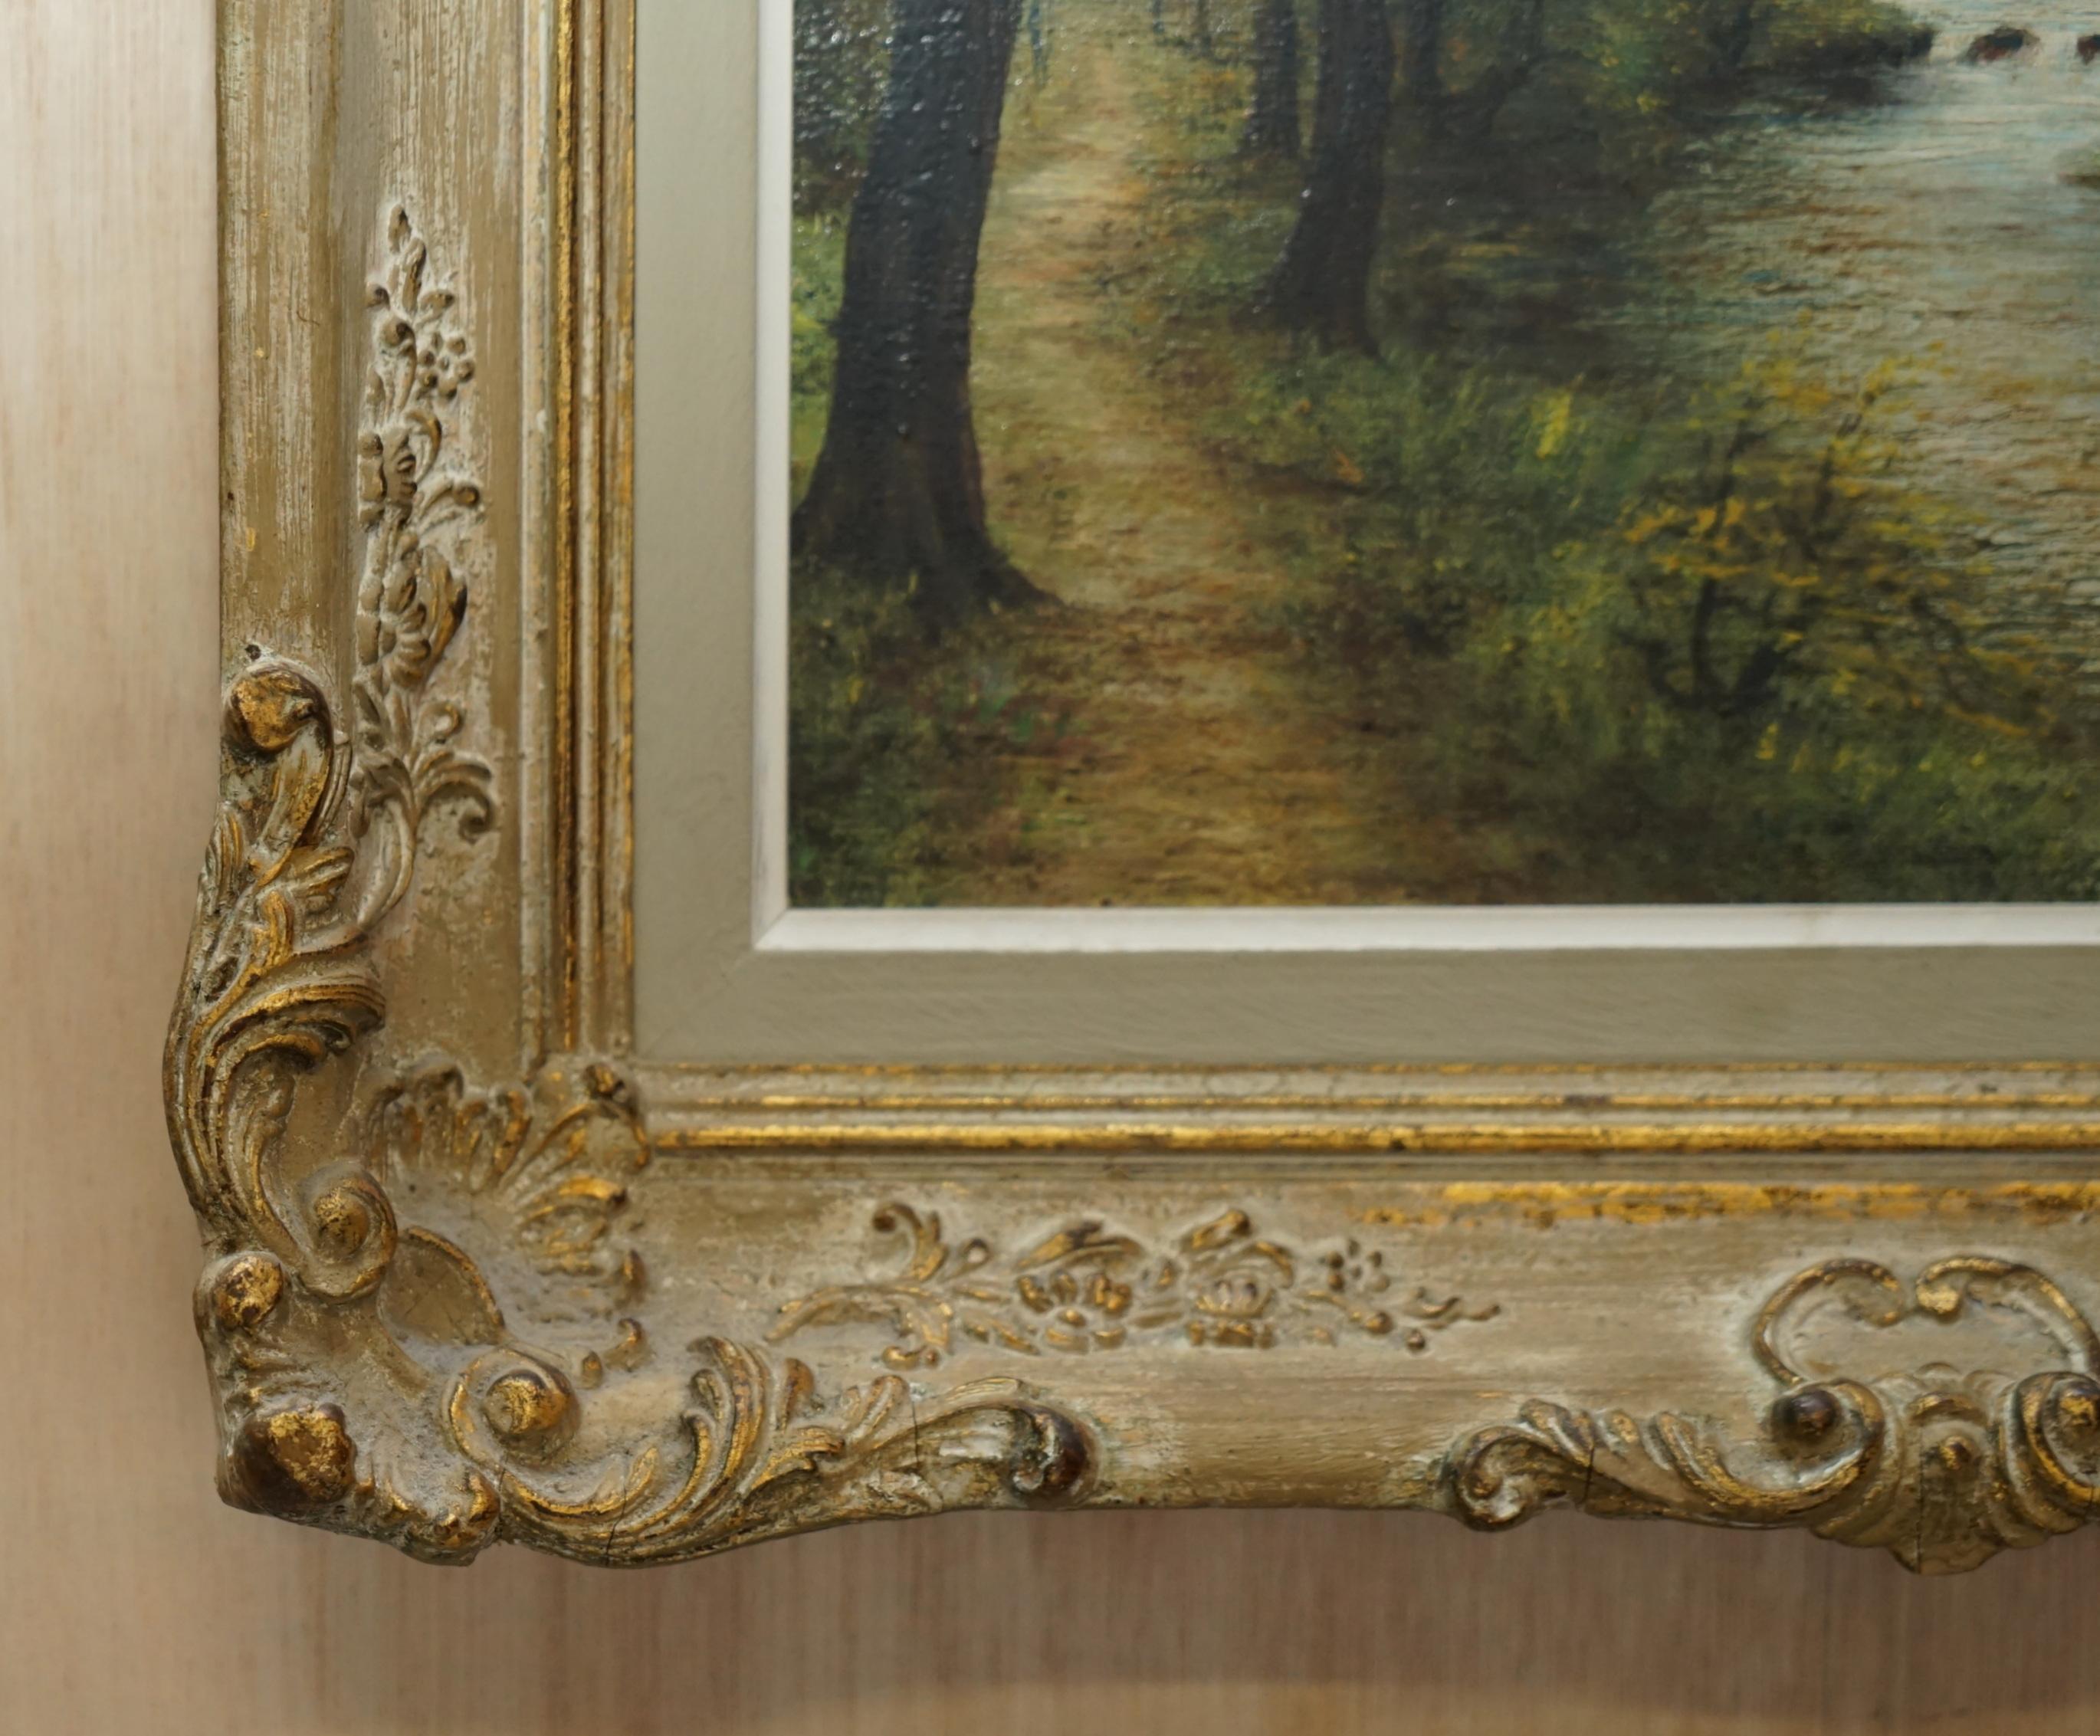 Canvas Antique Flemish Oil Painting Signed Van Overbroek circa 1880 Lovely Rural Scene For Sale